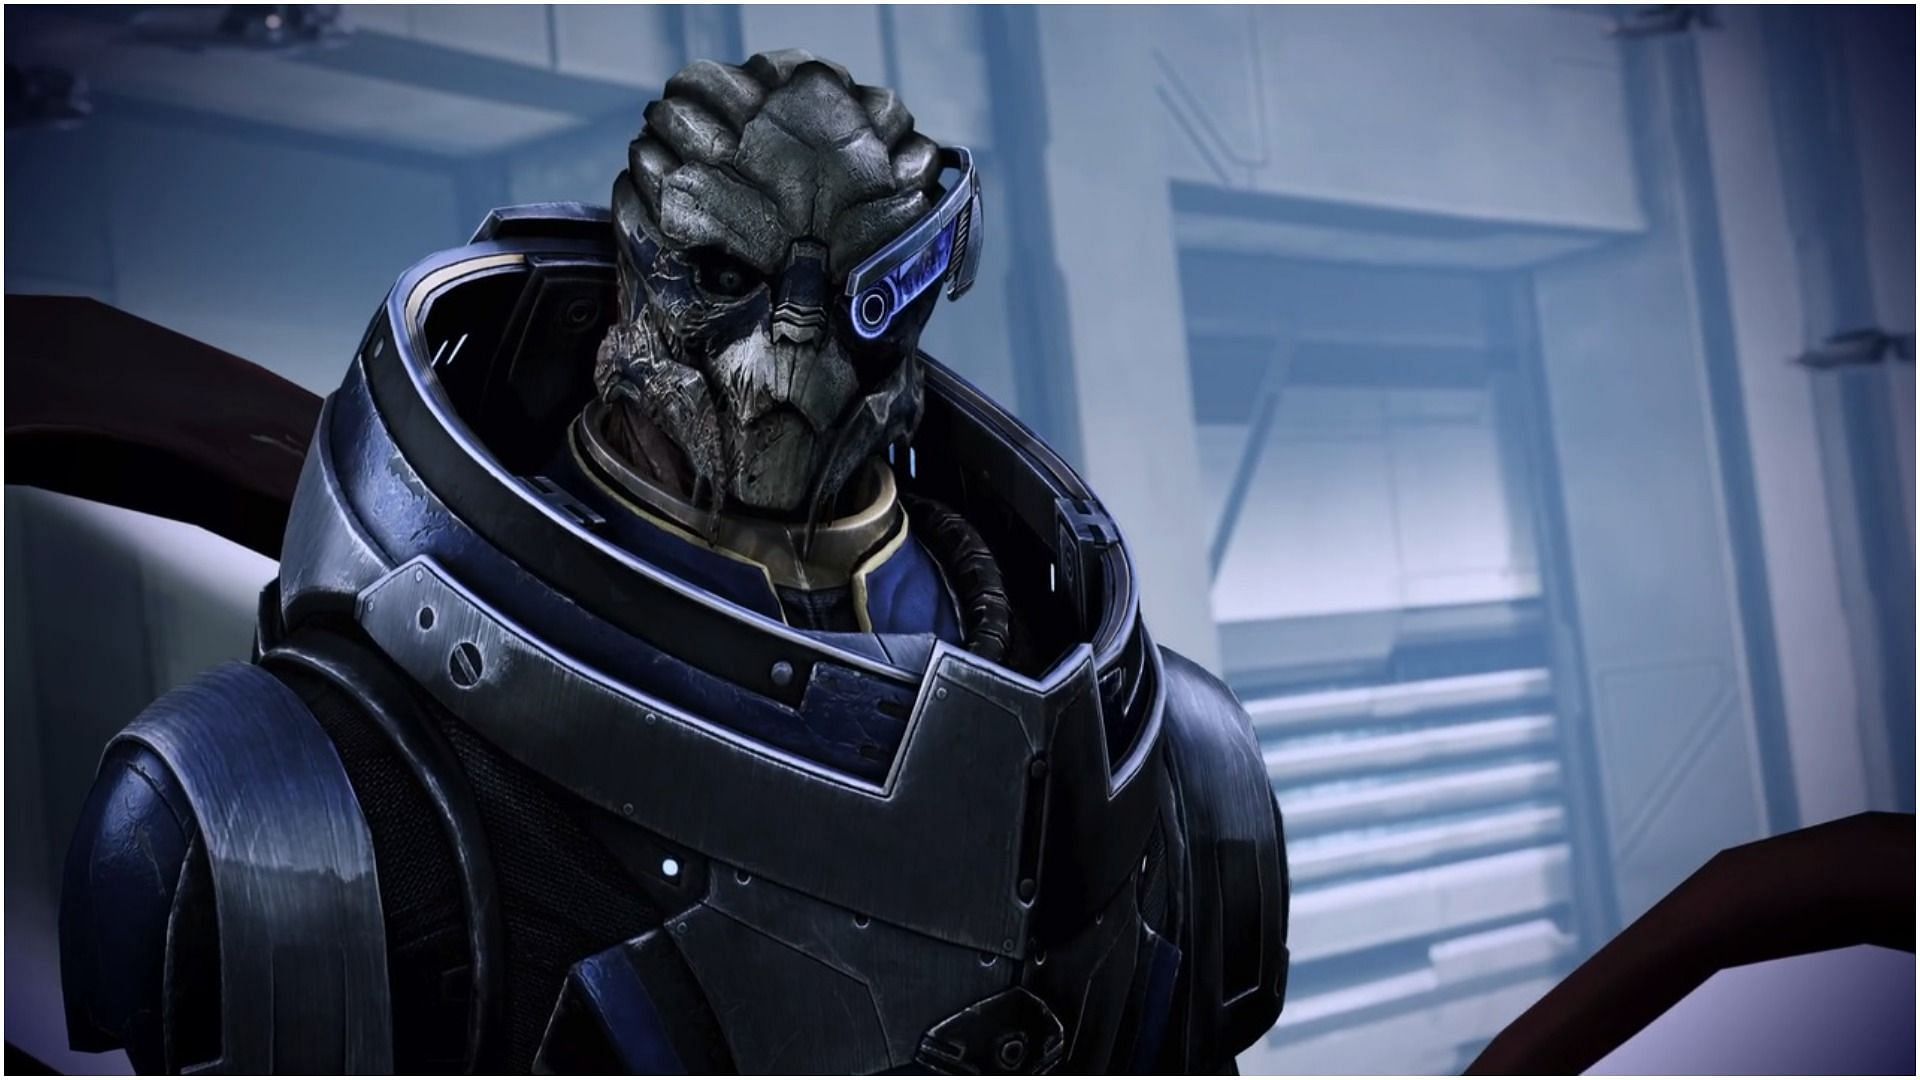 Garrus Vakarian is a calm, collected and sensible character aboard the Normandy (Image via BioWare)